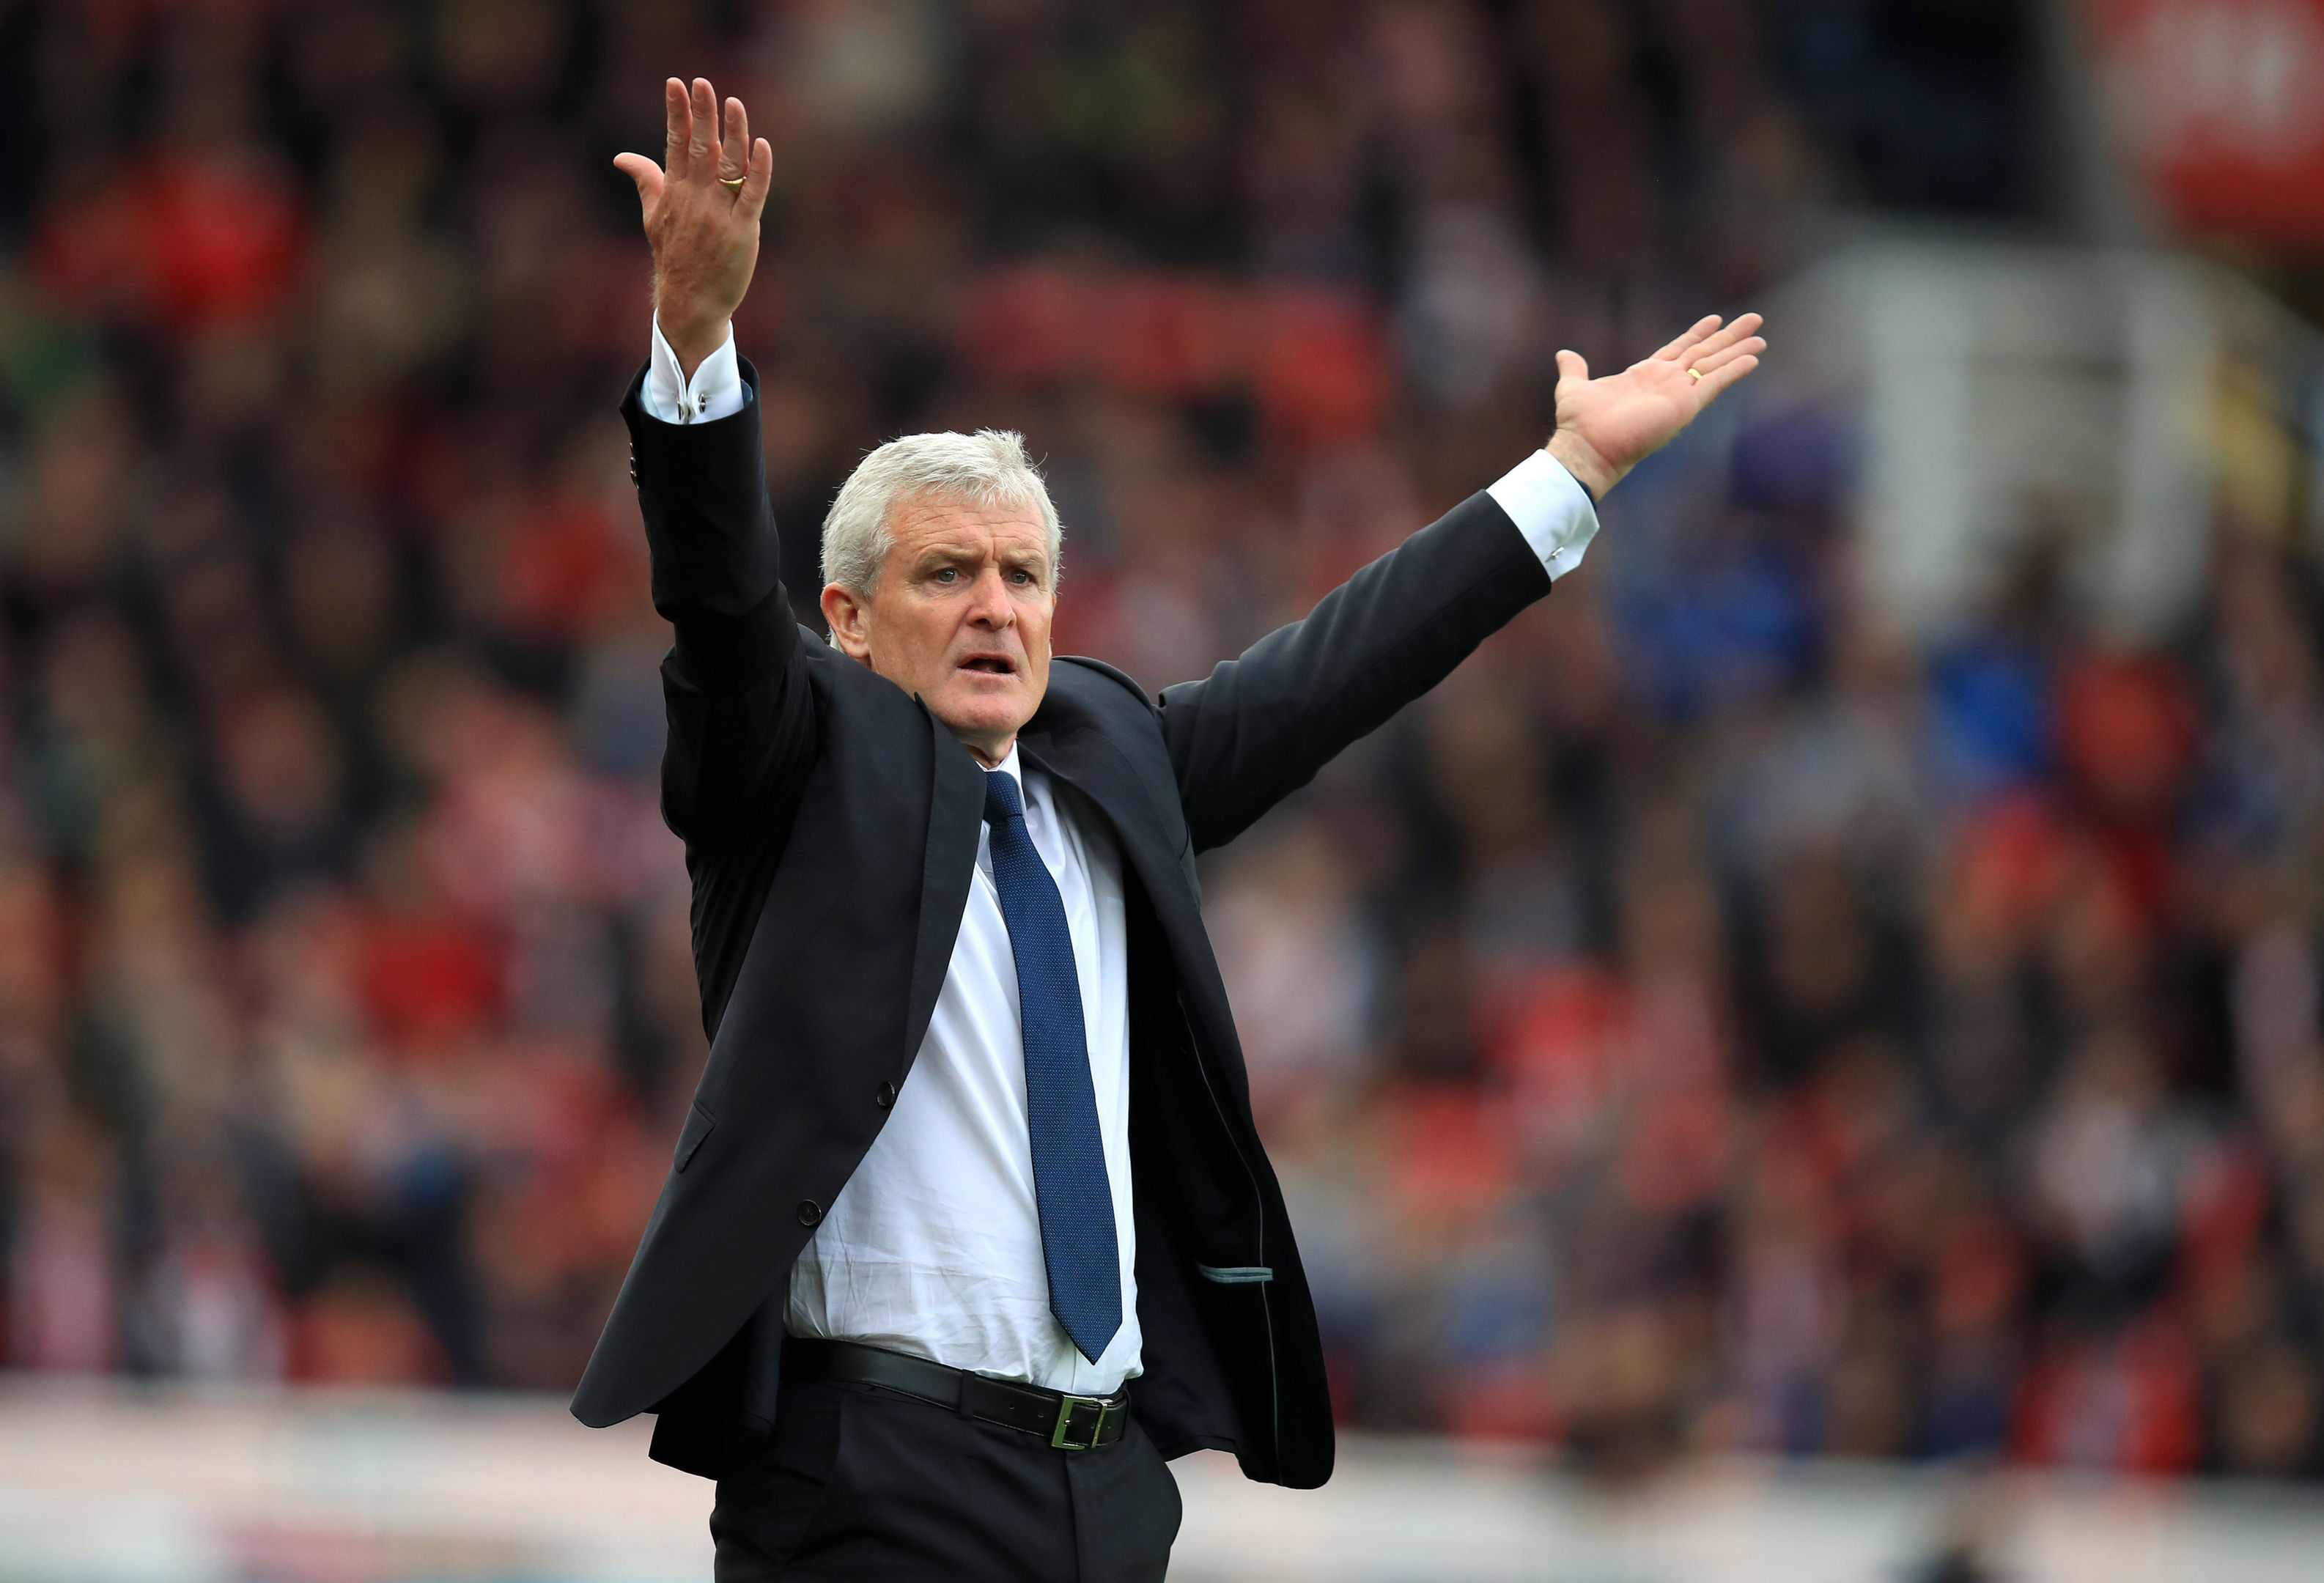 Stoke City manager Mark Hughes. (Mike Egerton/PA Wire)